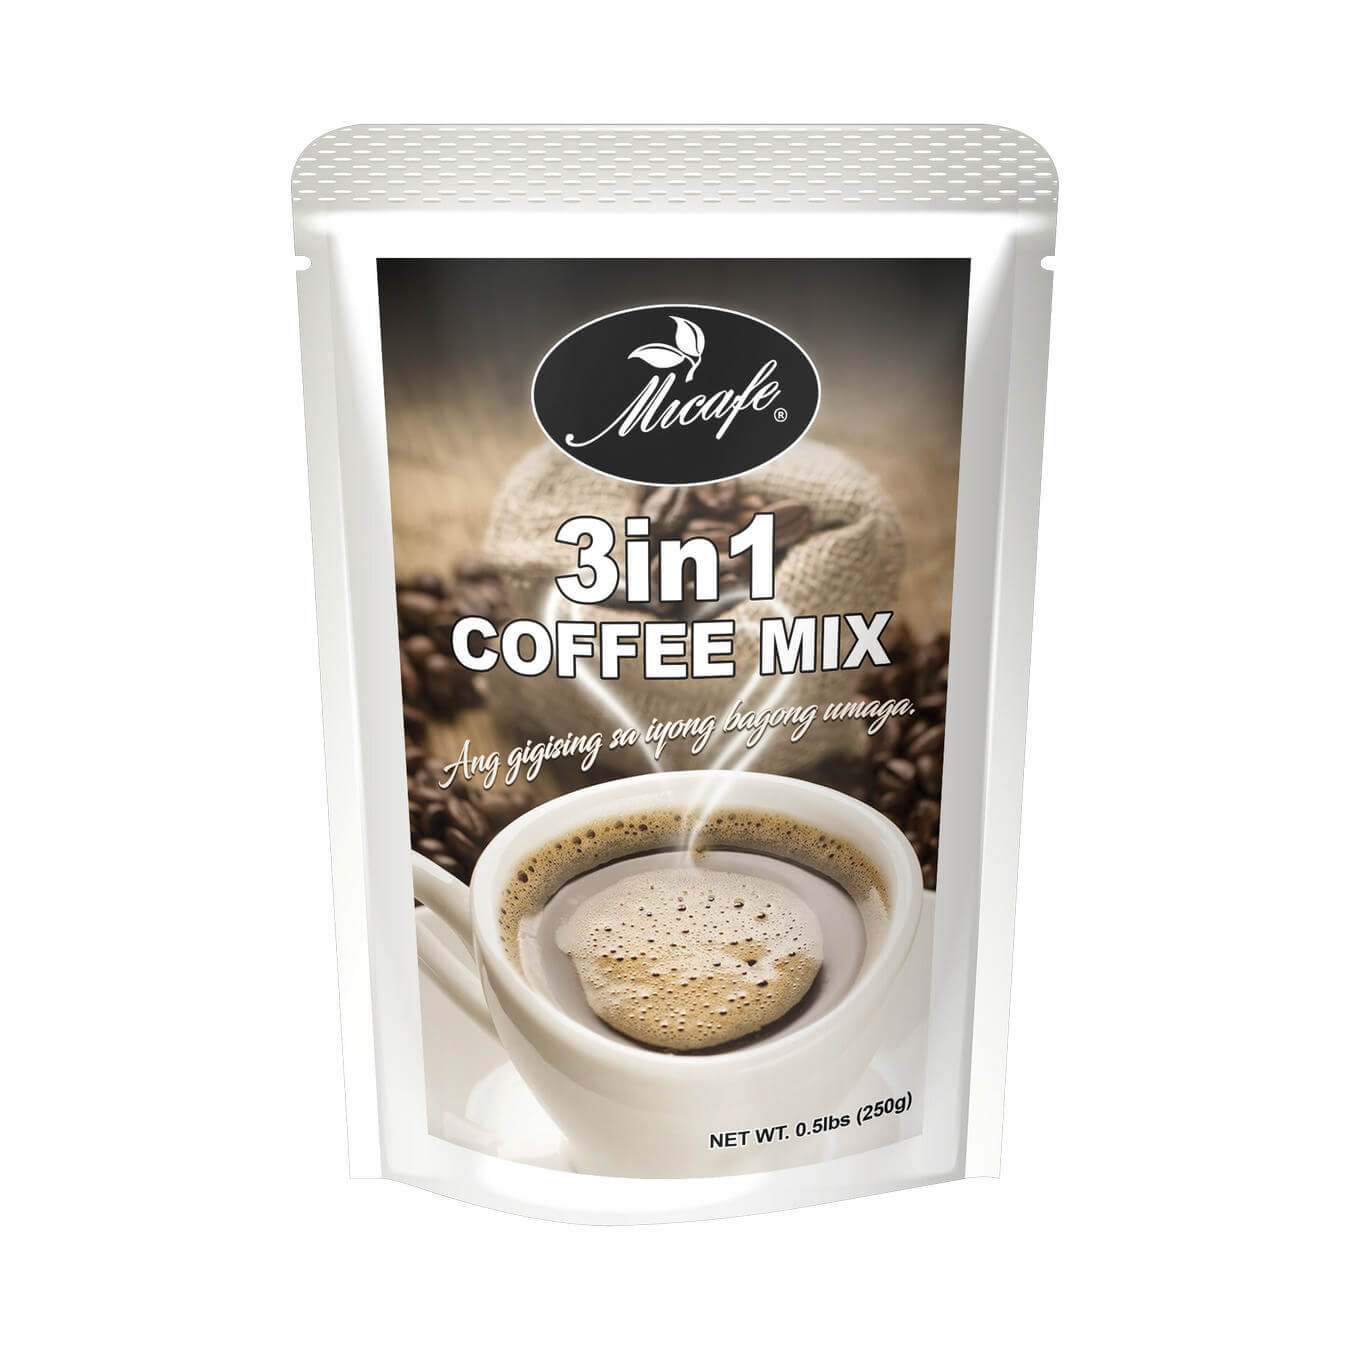 3in1 Coffee Mix